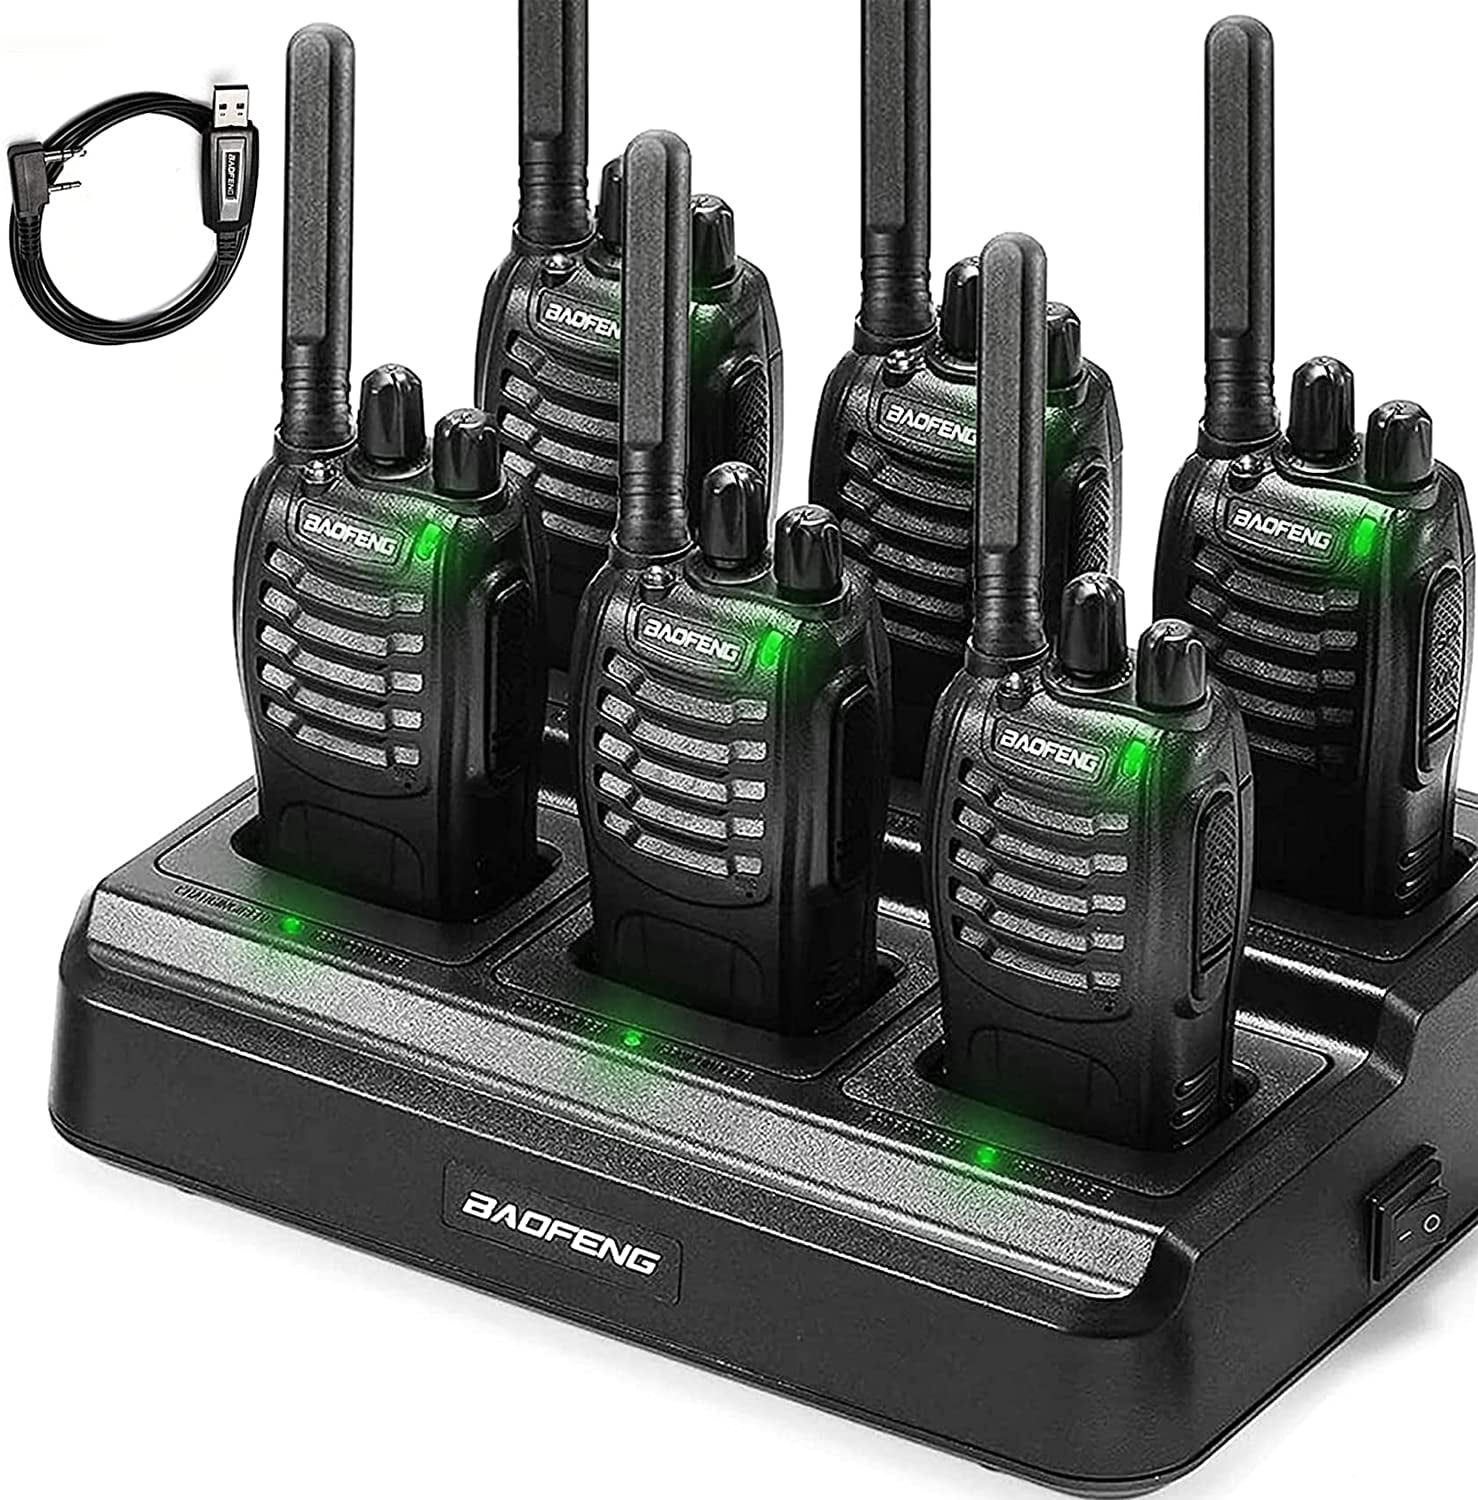 FRS Radio Long Range Two Way Radio 6 Radio and 1 Multi Unit Charger Station Upgrade Version of BF-888S with Earpiece BAOFENG BF-88ST Six-Way Charger Bulk License-Free USB Charging 